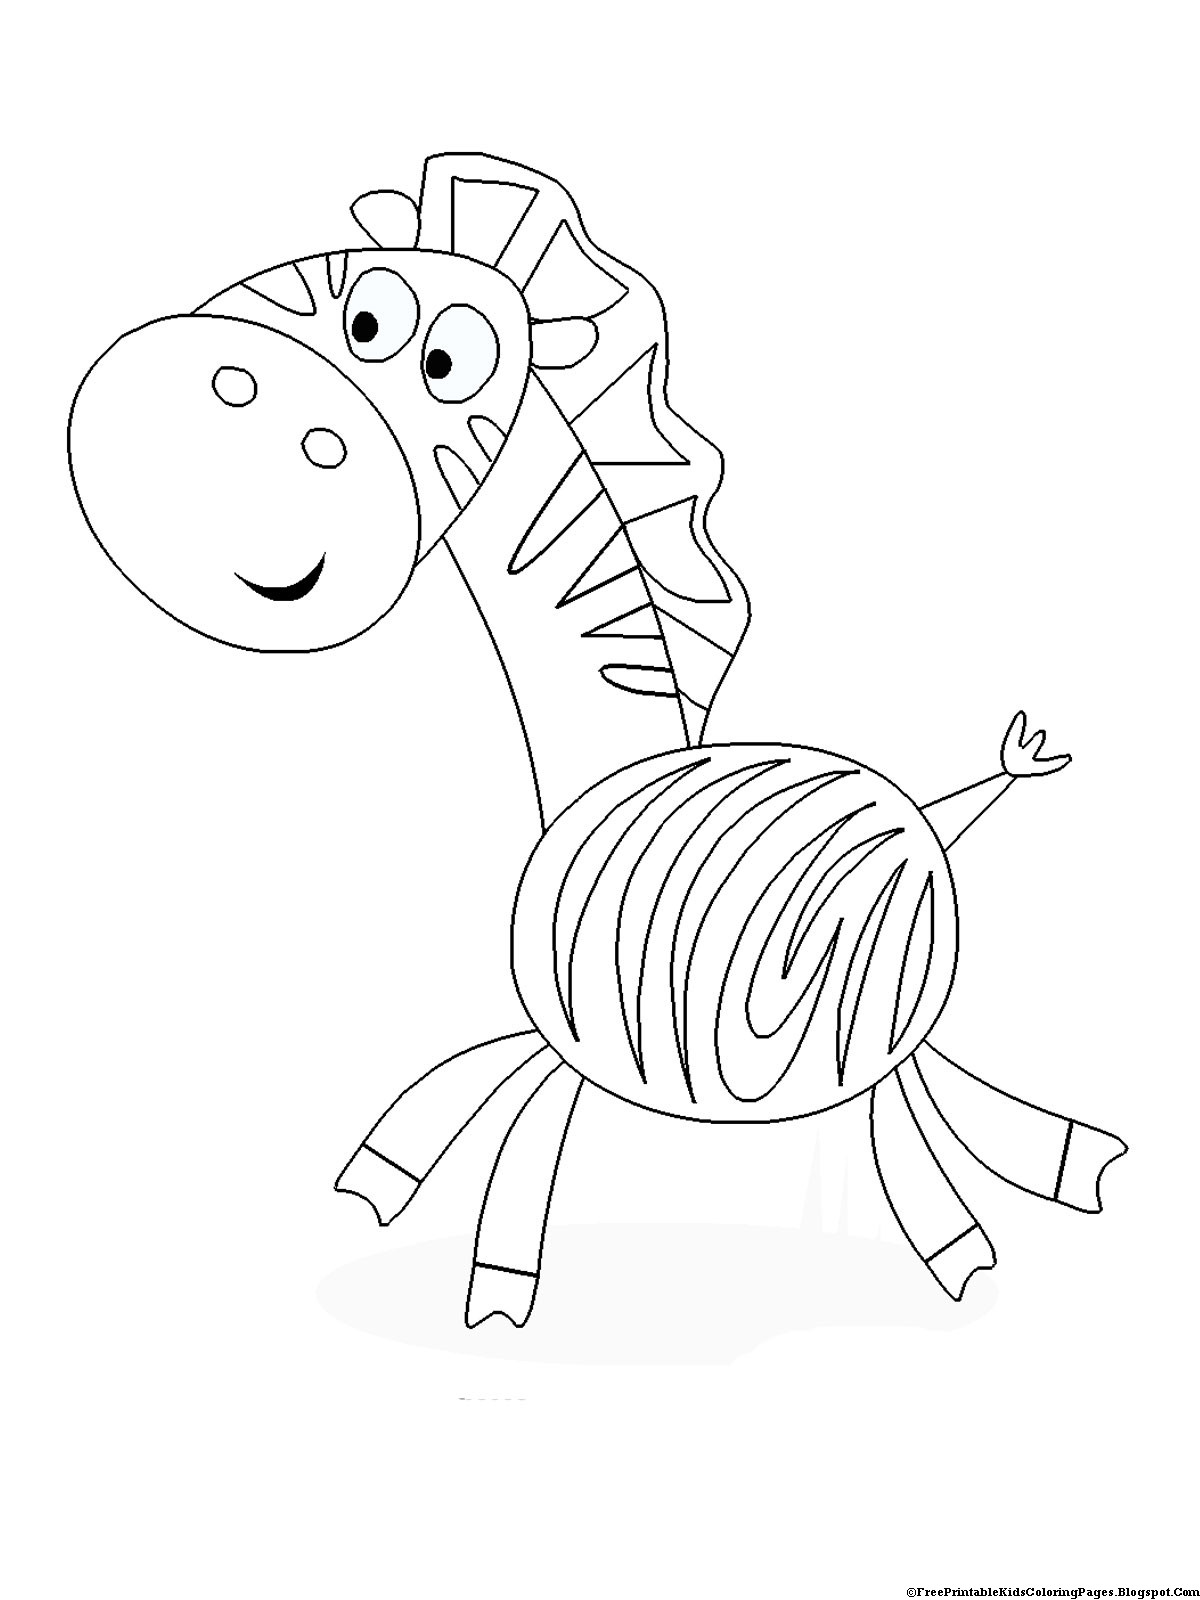 Printed Coloring Pages
 Zebra Coloring Pages Free Printable Kids Coloring Pages